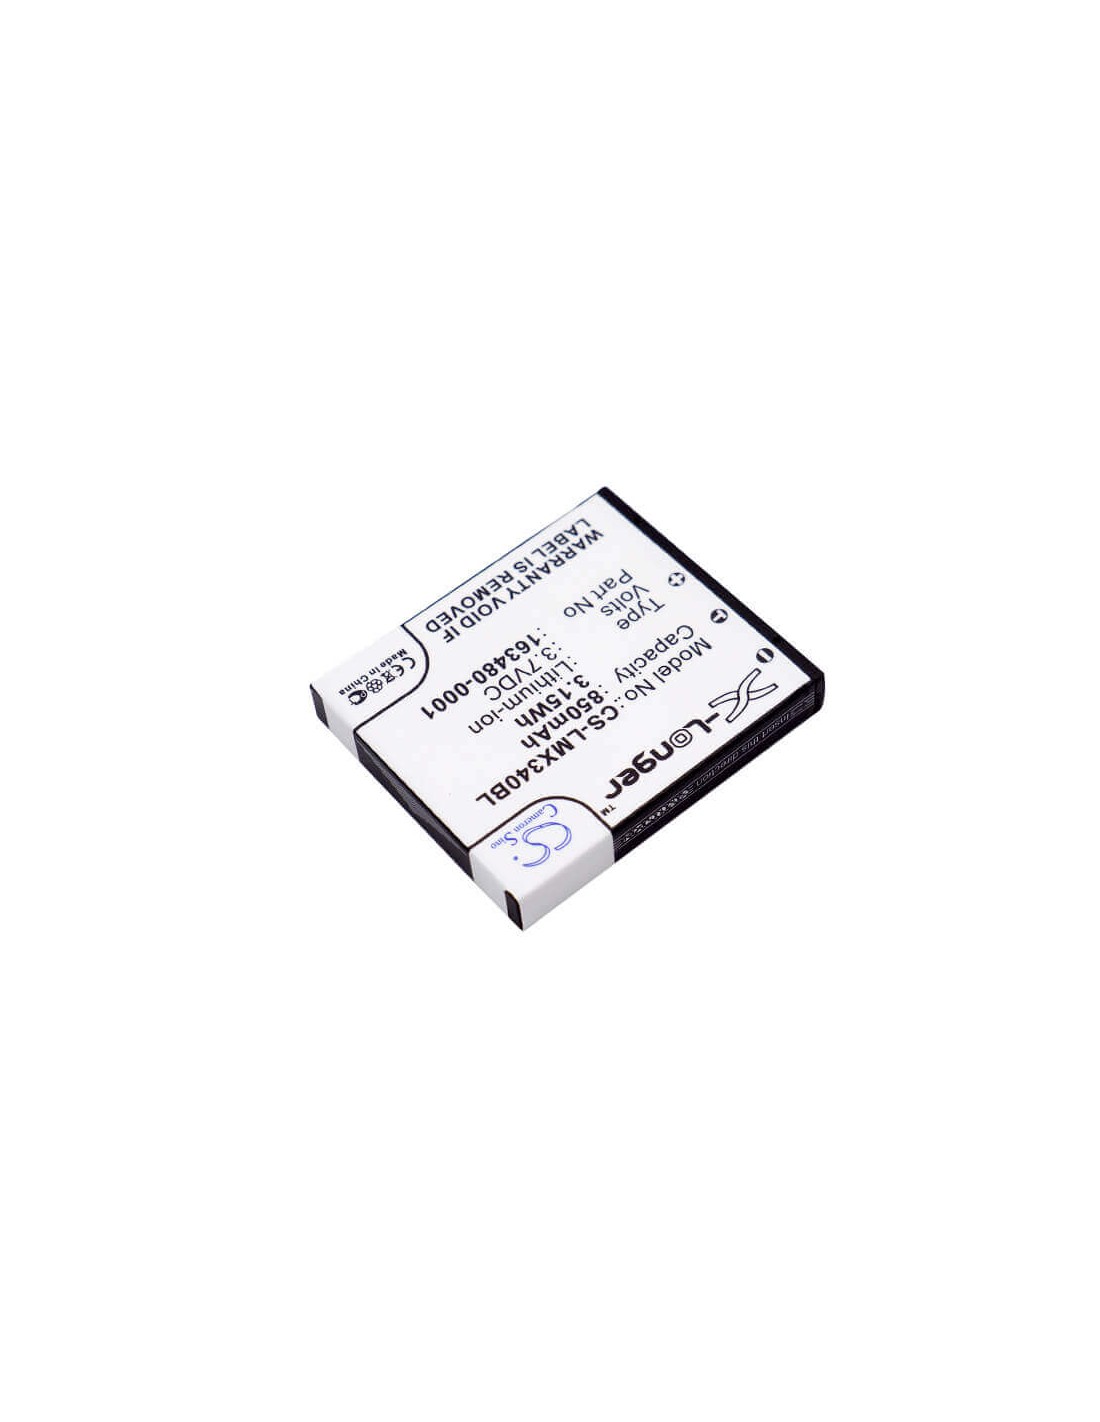 Battery for Lxe, 8650 Bluetooth Ring Scanners, Bluetooth Ring Scanner, L 3.7V, 850mAh - 3.15Wh